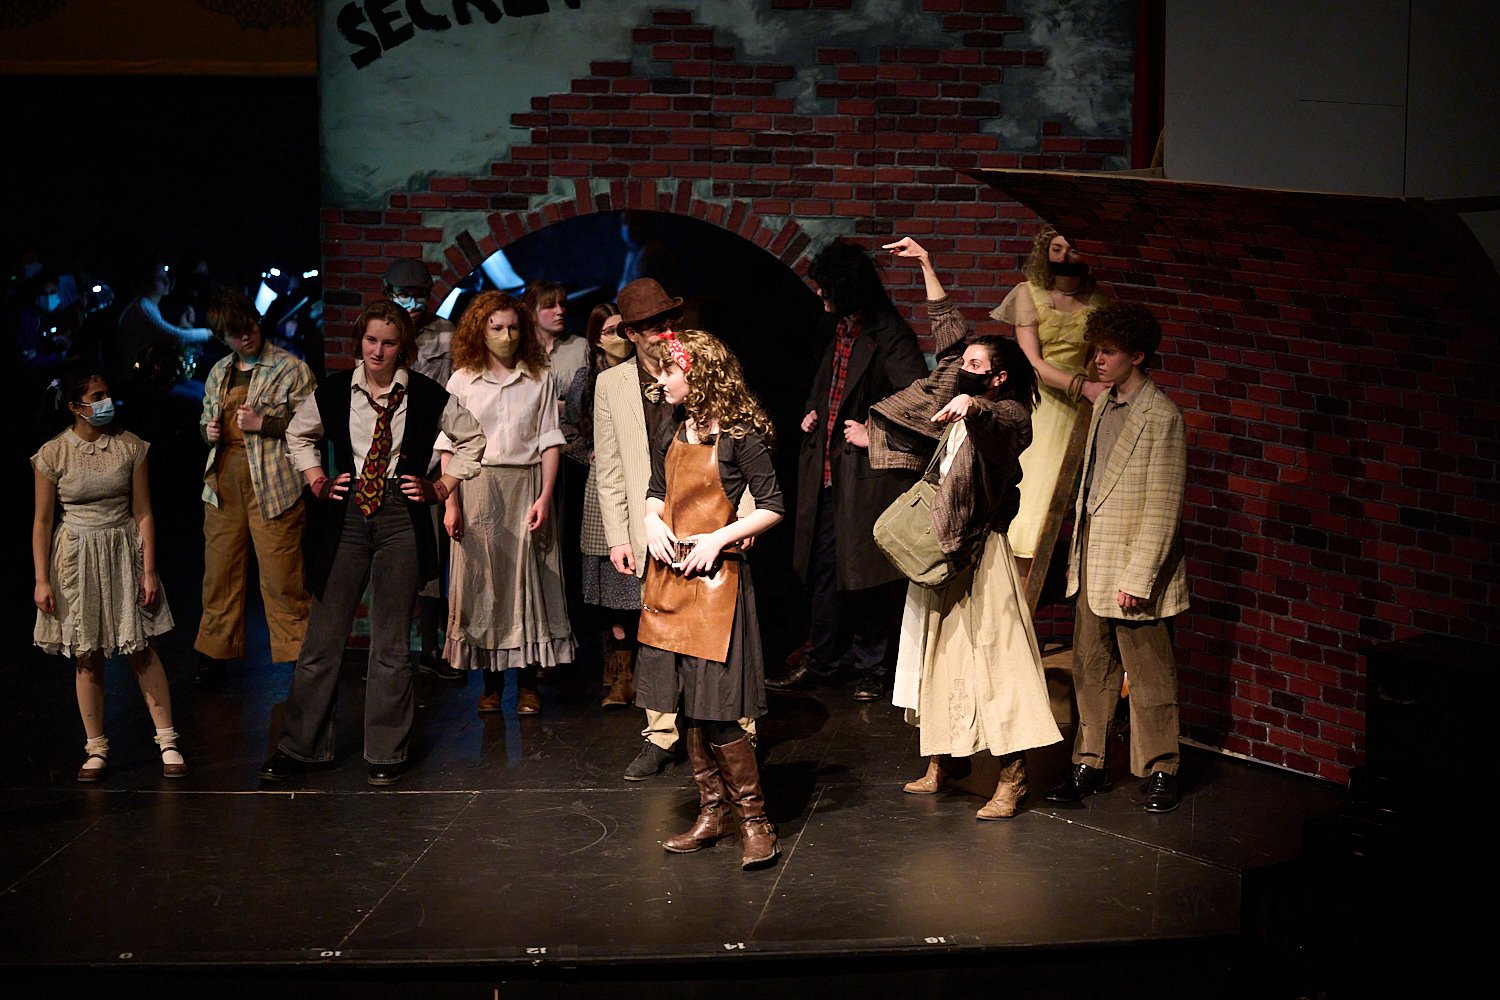  SEWICKLEY, PA, USA - MARCH 2ND 2022: High School students of Sewickley Academy are performing in an annual musical show “Urinetown” running on March 3rd-5th 2022. Alexandra Cordle 